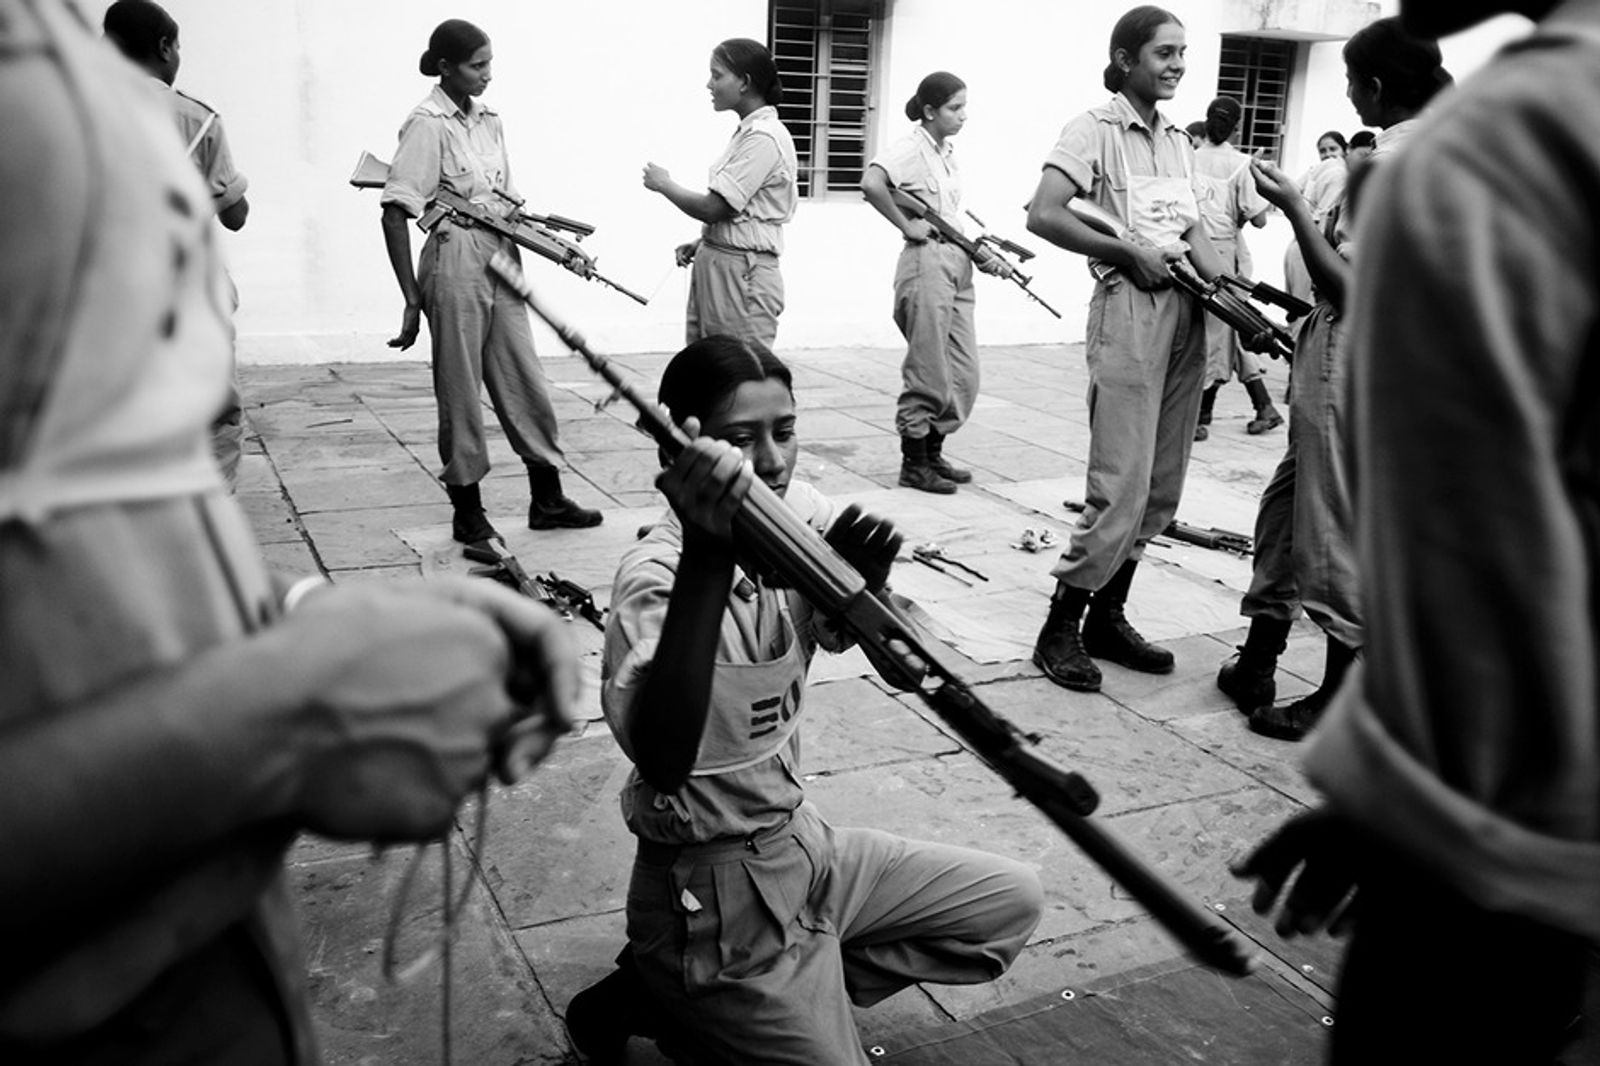 © Poulomi Basu - Women from the Indian Border Security Armed Force during a weapon-cleaning session in their training, Kharkan, August 2009.